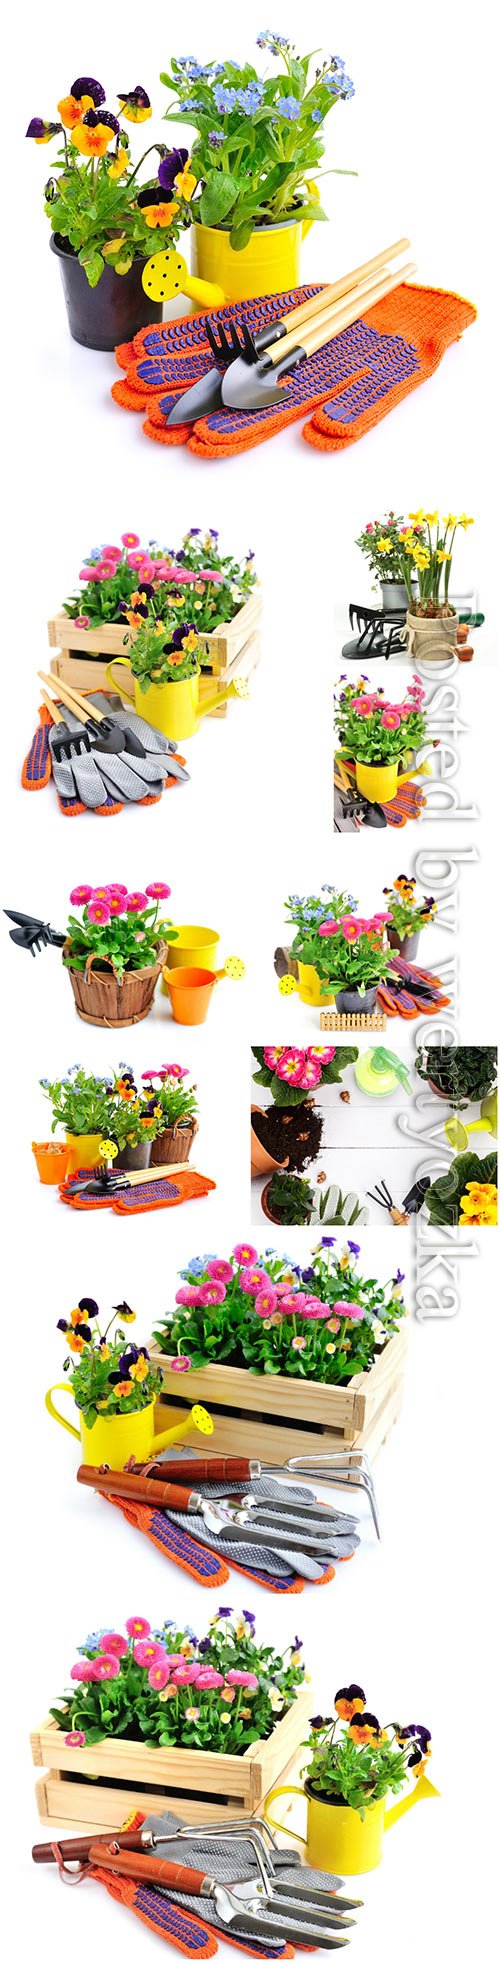 Gardening tools and spring flowers